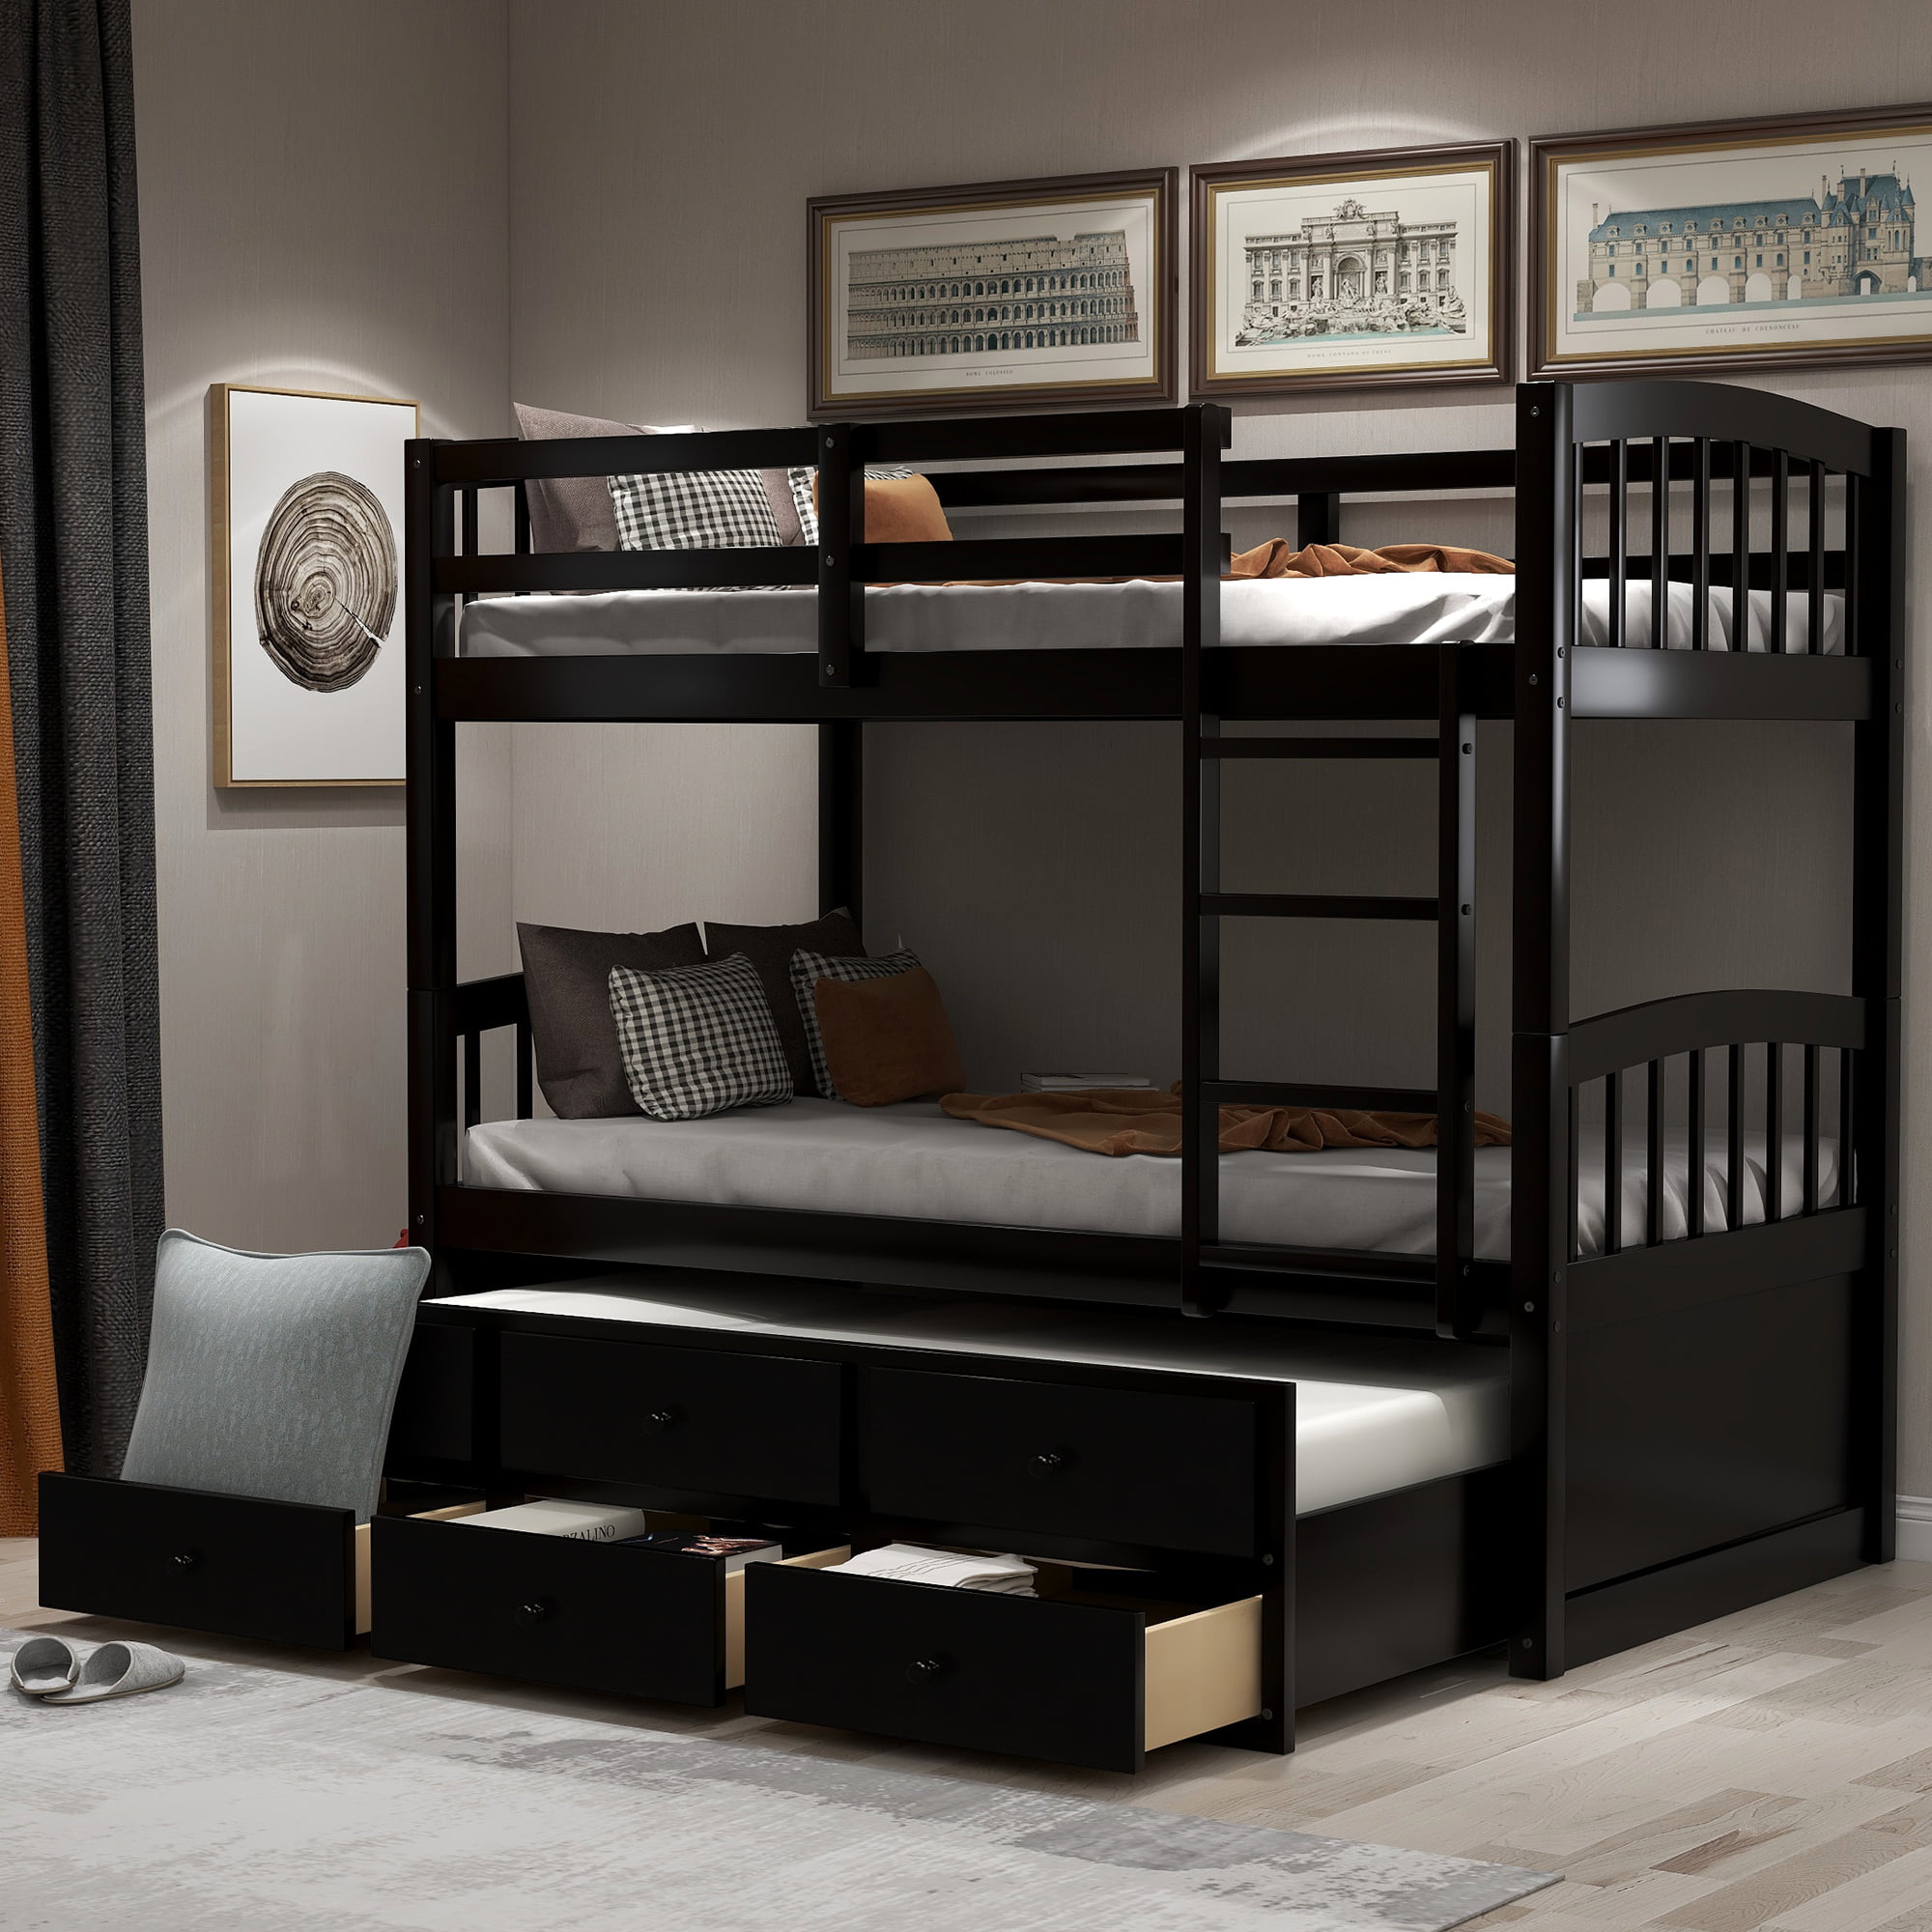 Urhomepro Twin Over Bunk Beds, Twin Bunk Bed With Trundle And Storage